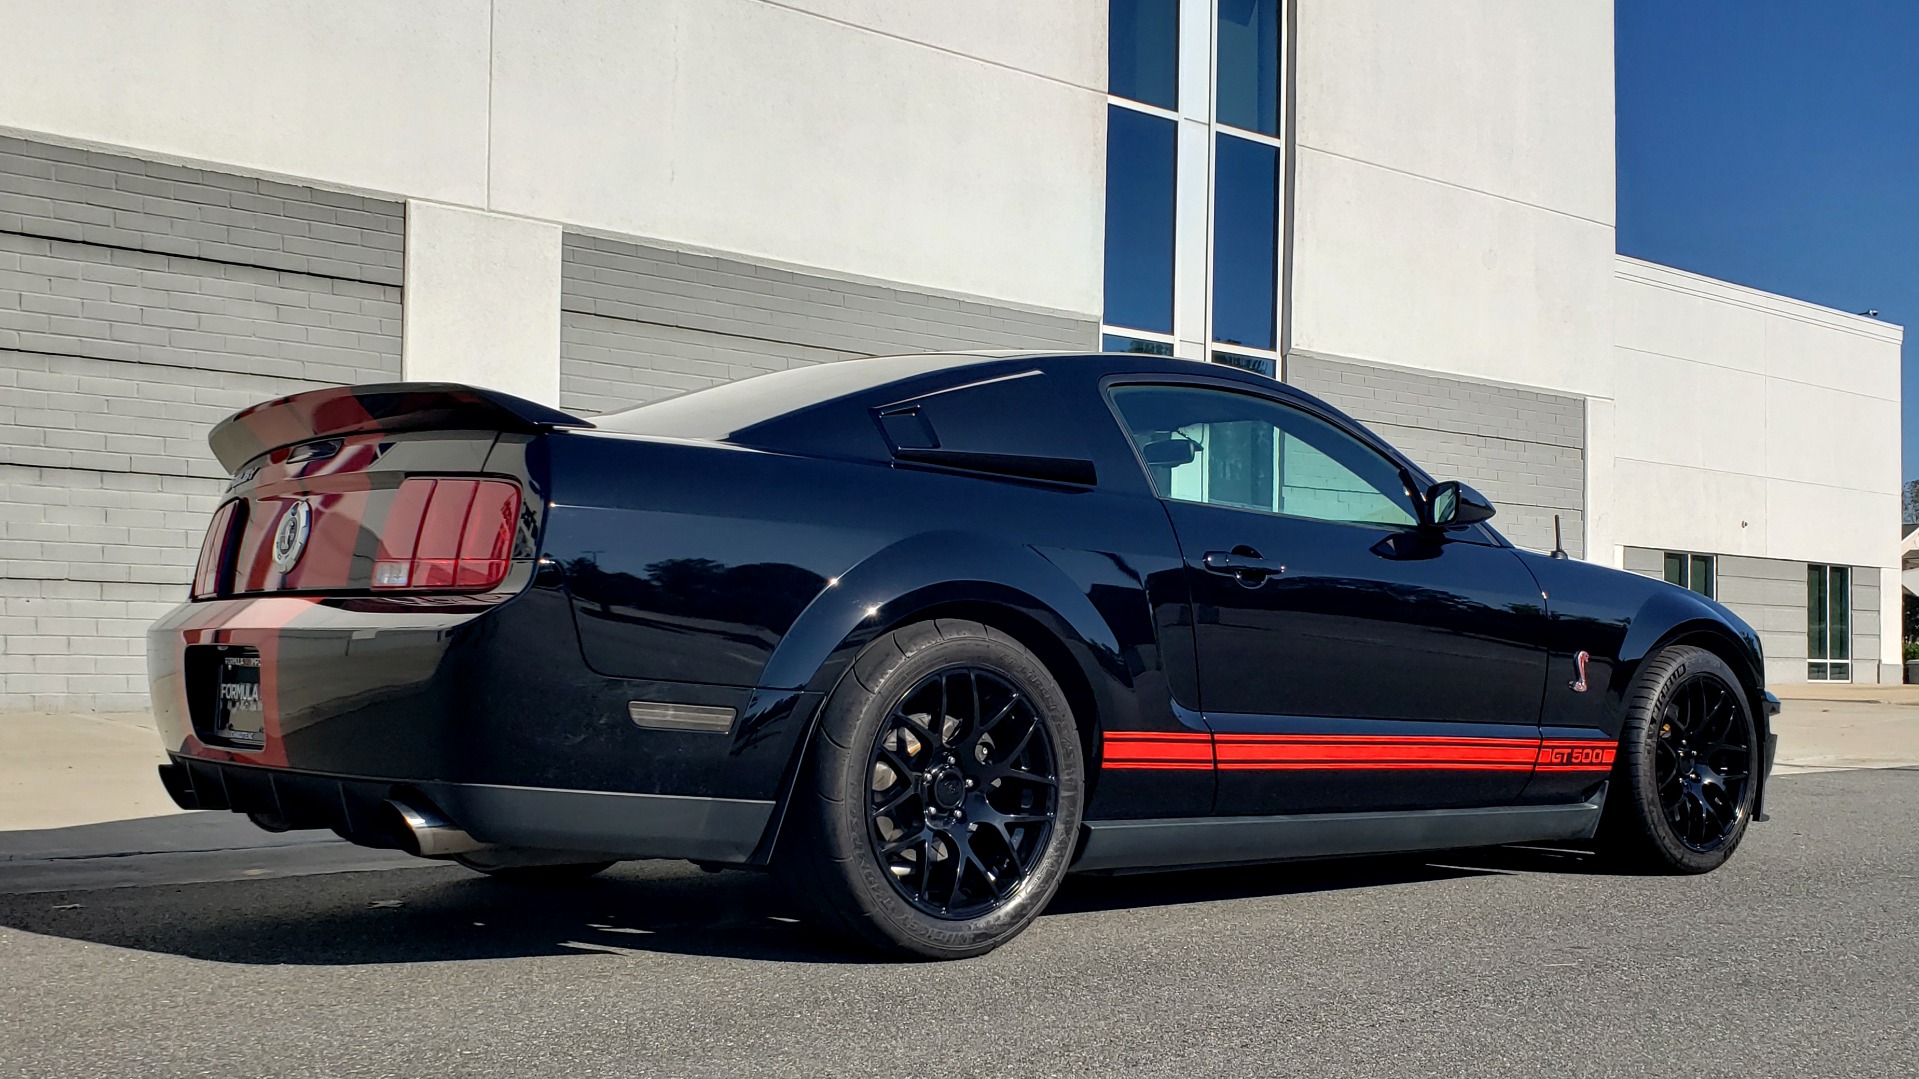 Used 2009 Ford MUSTANG SHELBY GT500 / RED SNAKE EDITION / UPGRADED 750RWHP / NAV / SHAKER SND for sale Sold at Formula Imports in Charlotte NC 28227 10